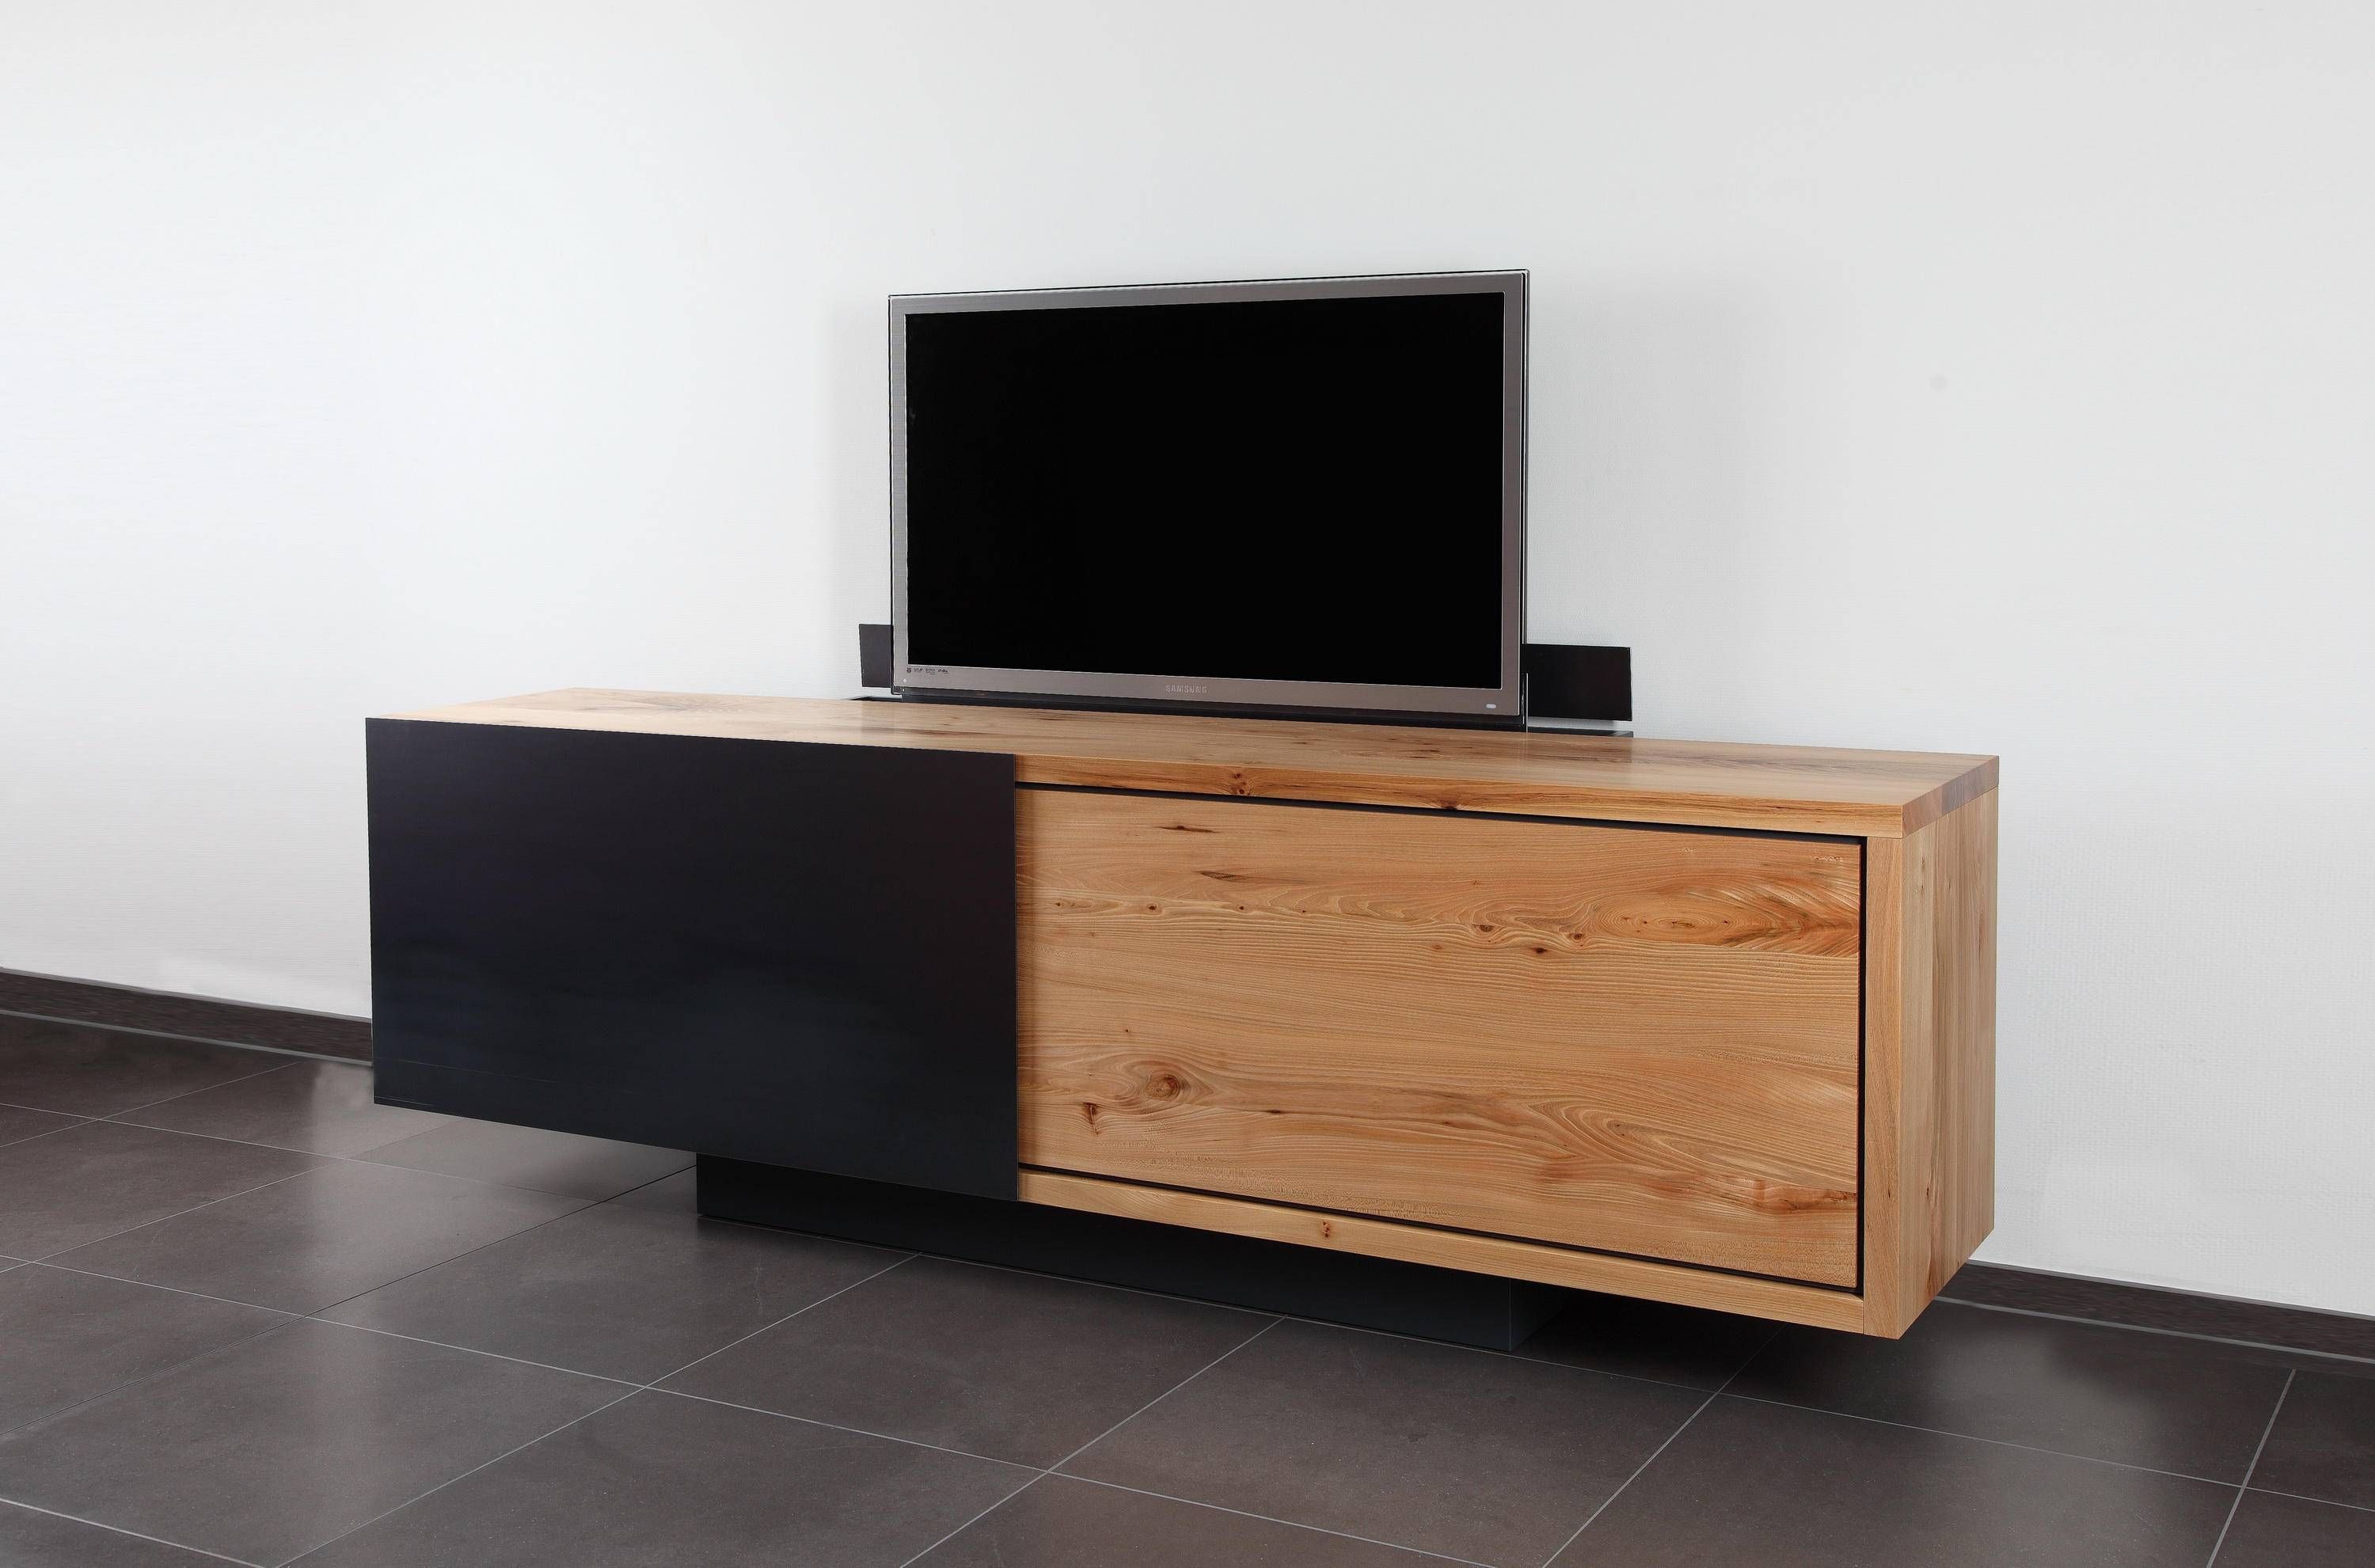 Ign. B2. Tv. Sideboard. – Multimedia Sideboards From Ign (View 2 of 30)